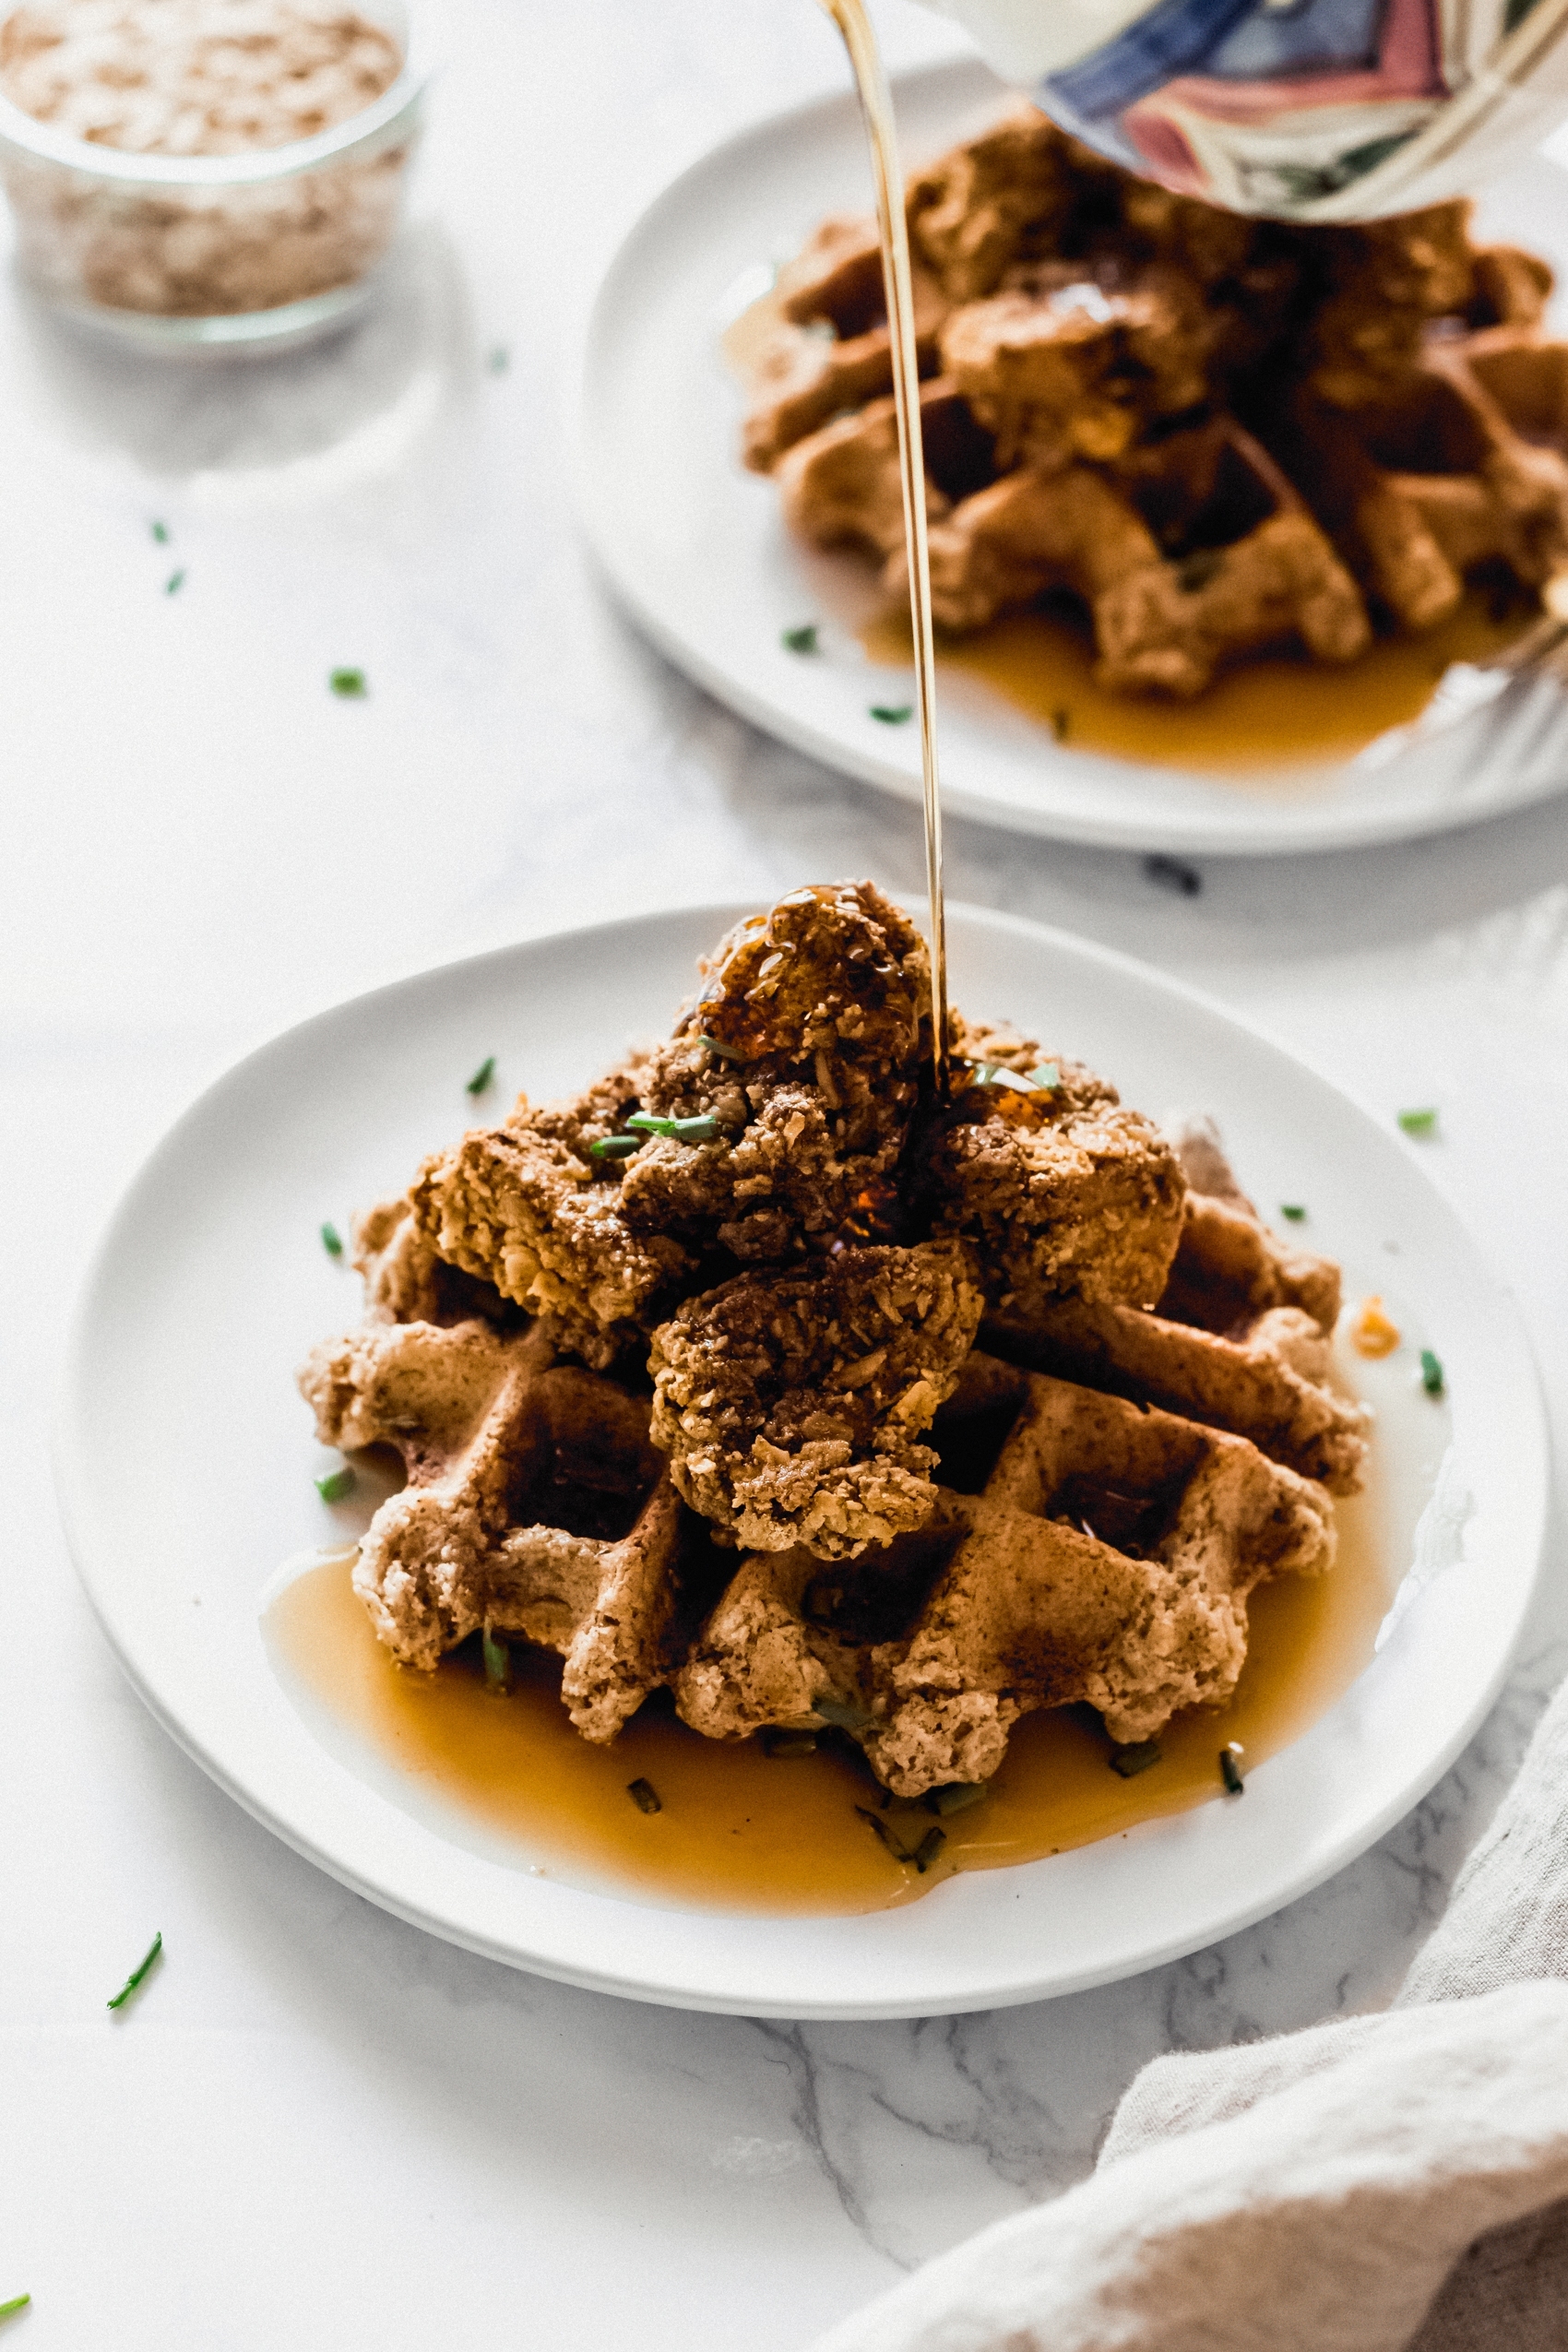 maple syrup being poured on top of a plate of vegan chicken and waffles